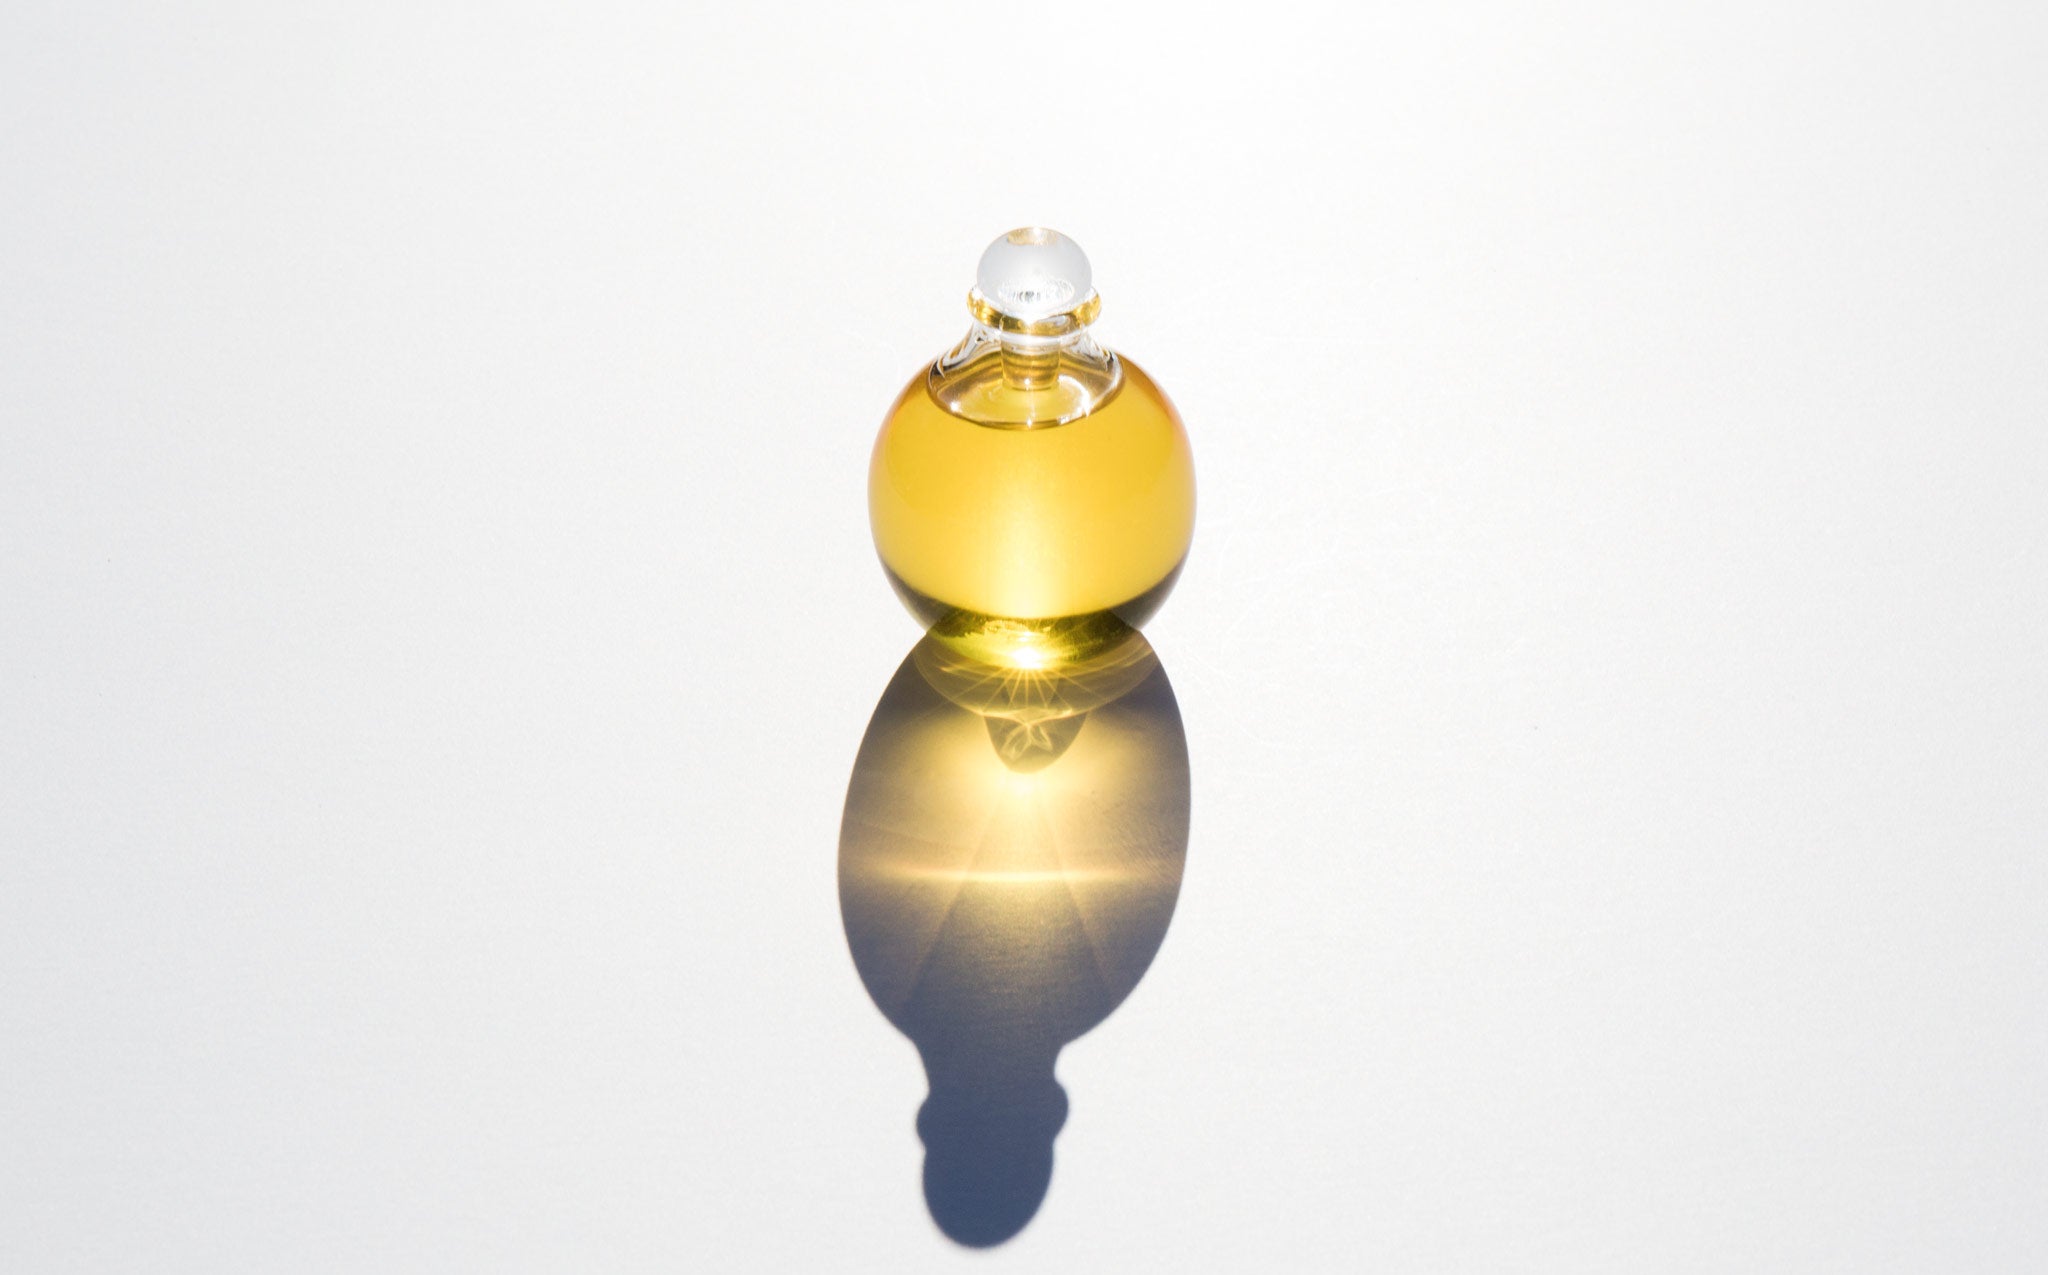 Ethereal Glow Facial Oil